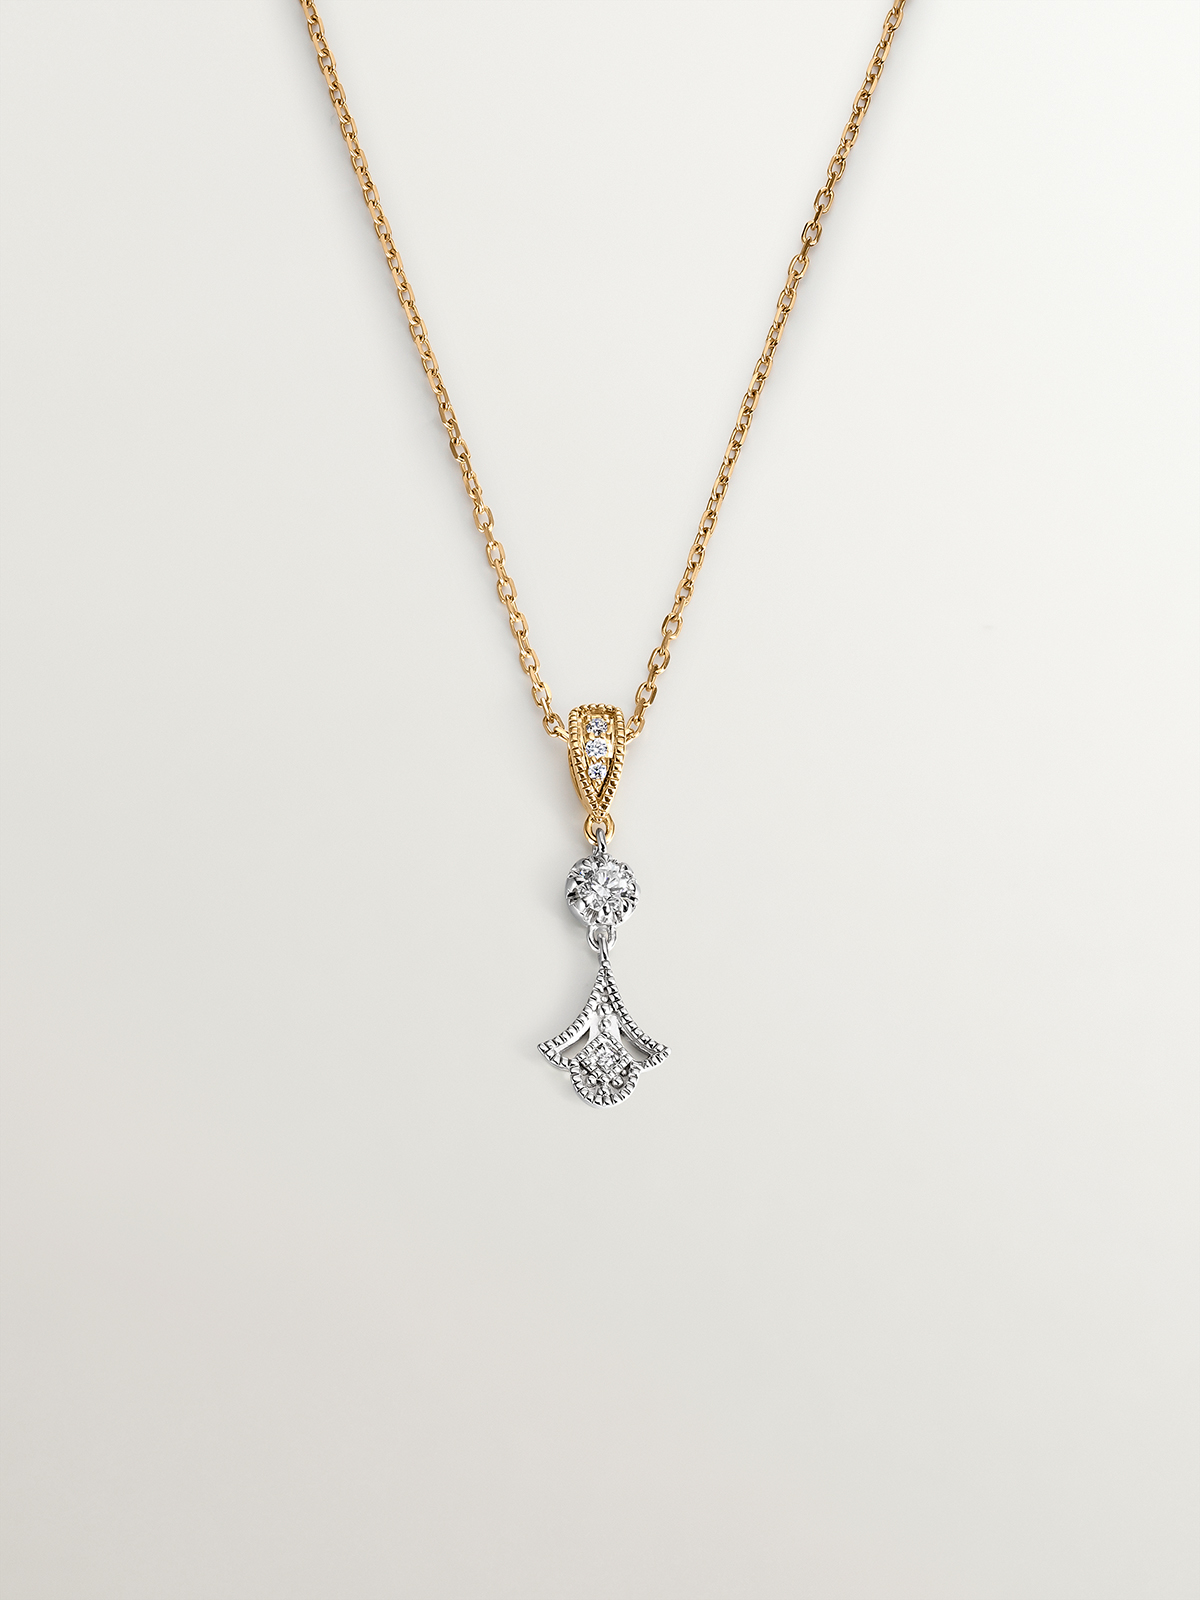 18K white and yellow gold pendant with brilliant cut diamonds